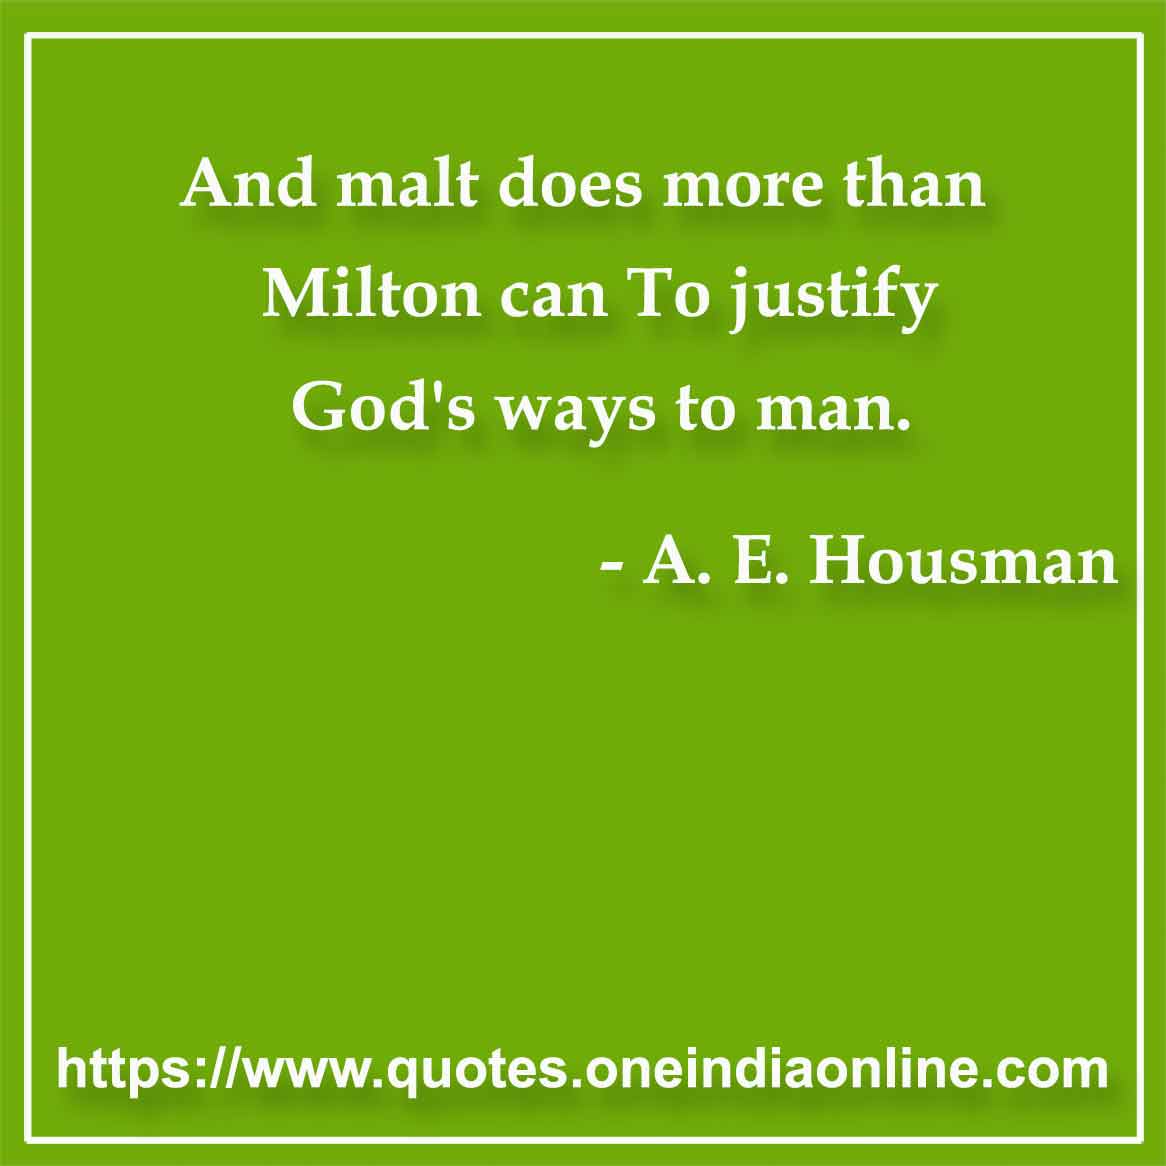 And malt does more than Milton can To justify God's ways to man.

- Drinking Quotes by A. E. Housman